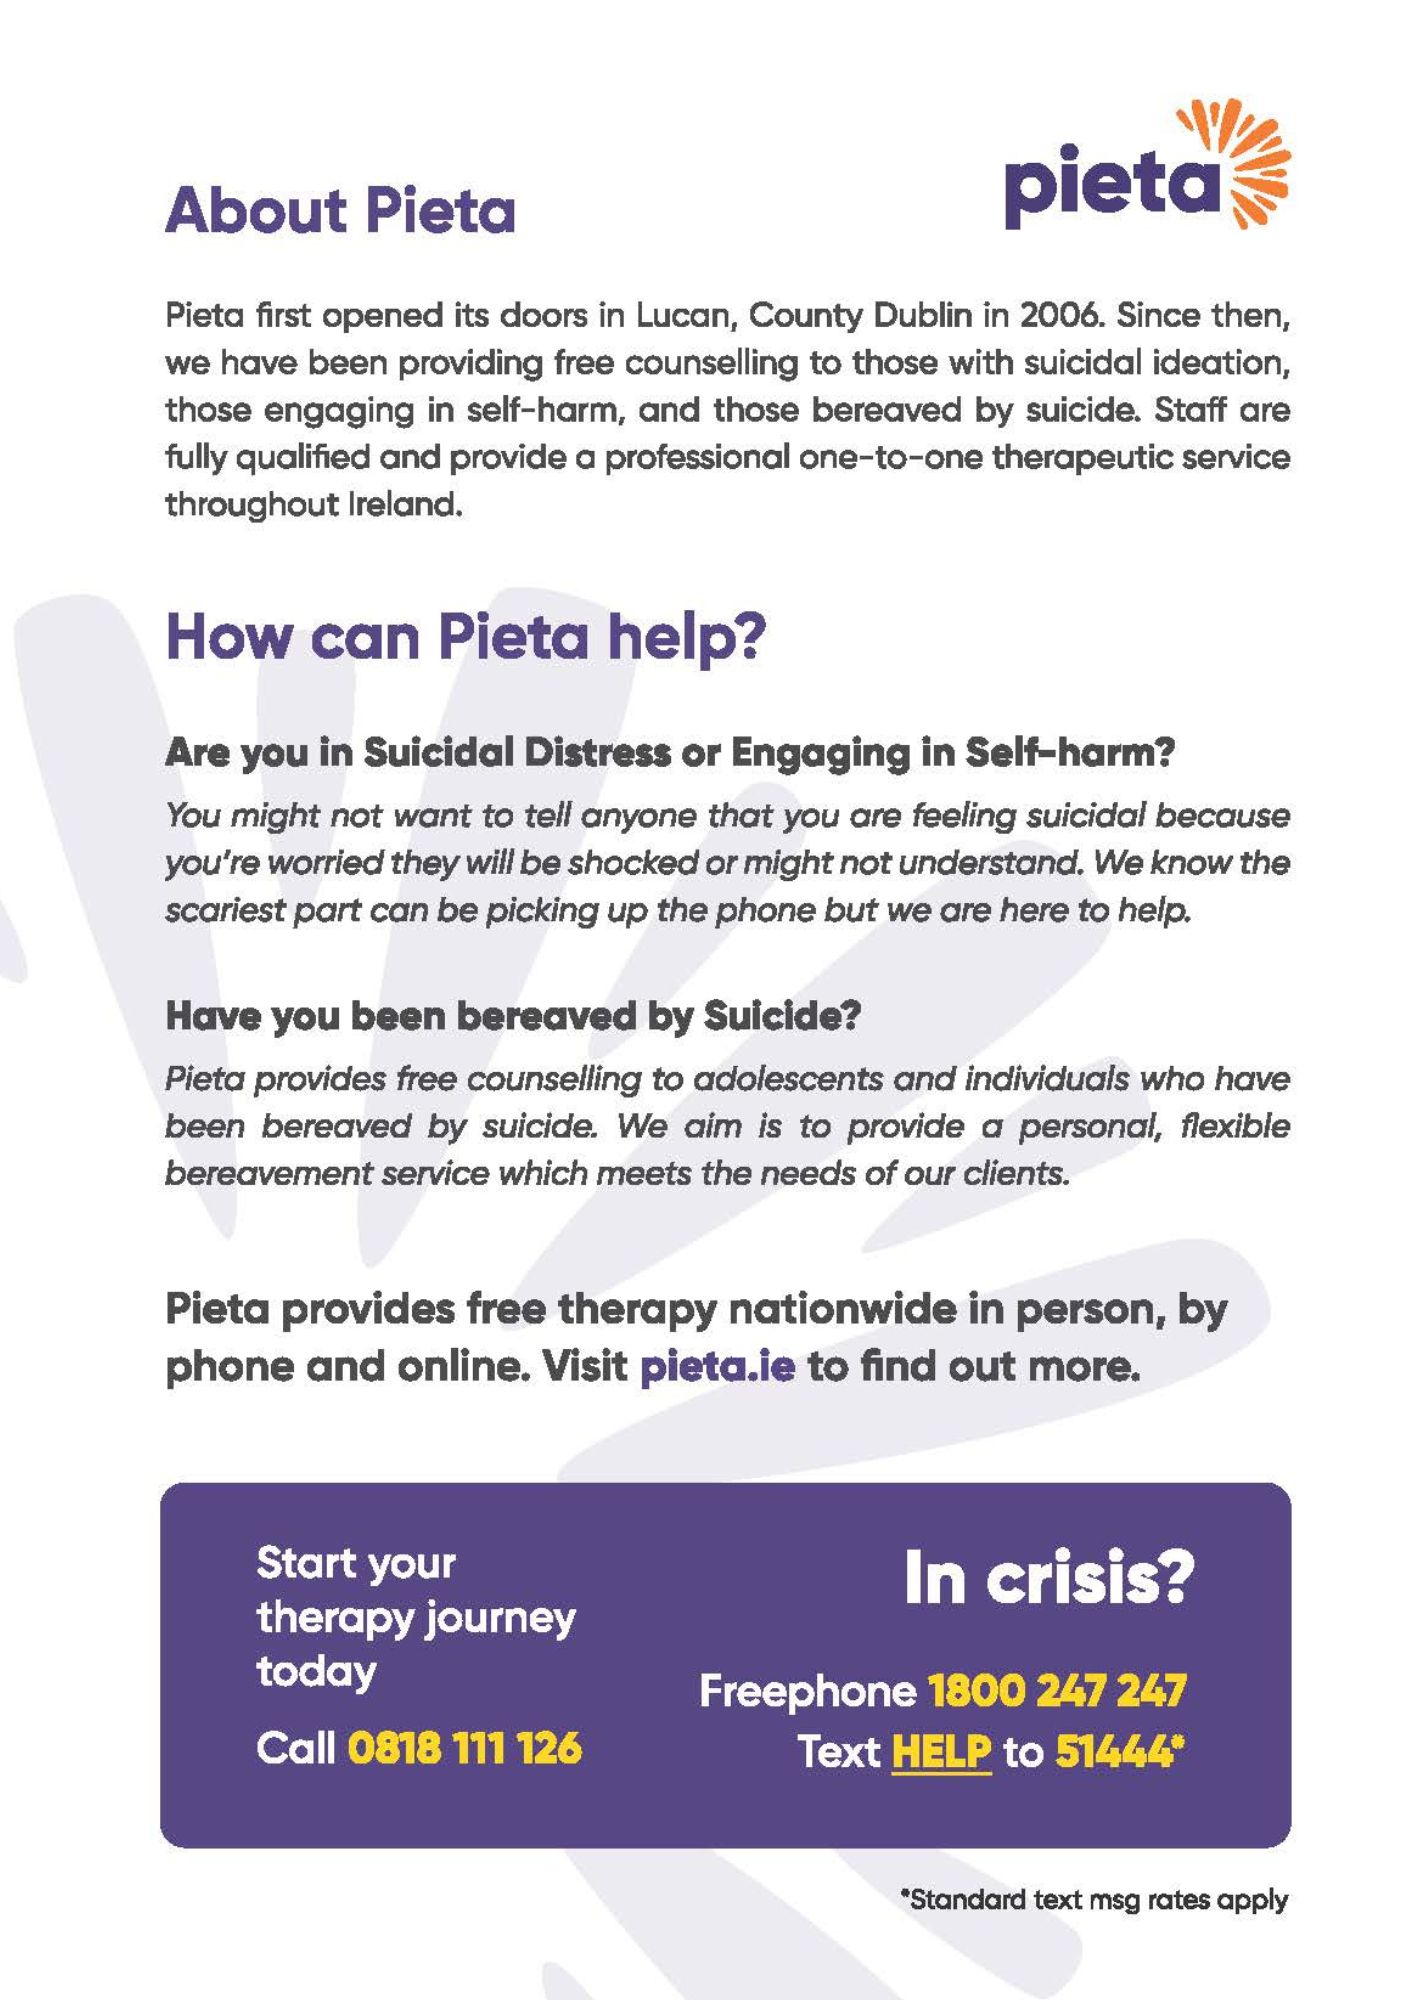 You are not alone. Pieta House are here to help if you need someone to talk to. 